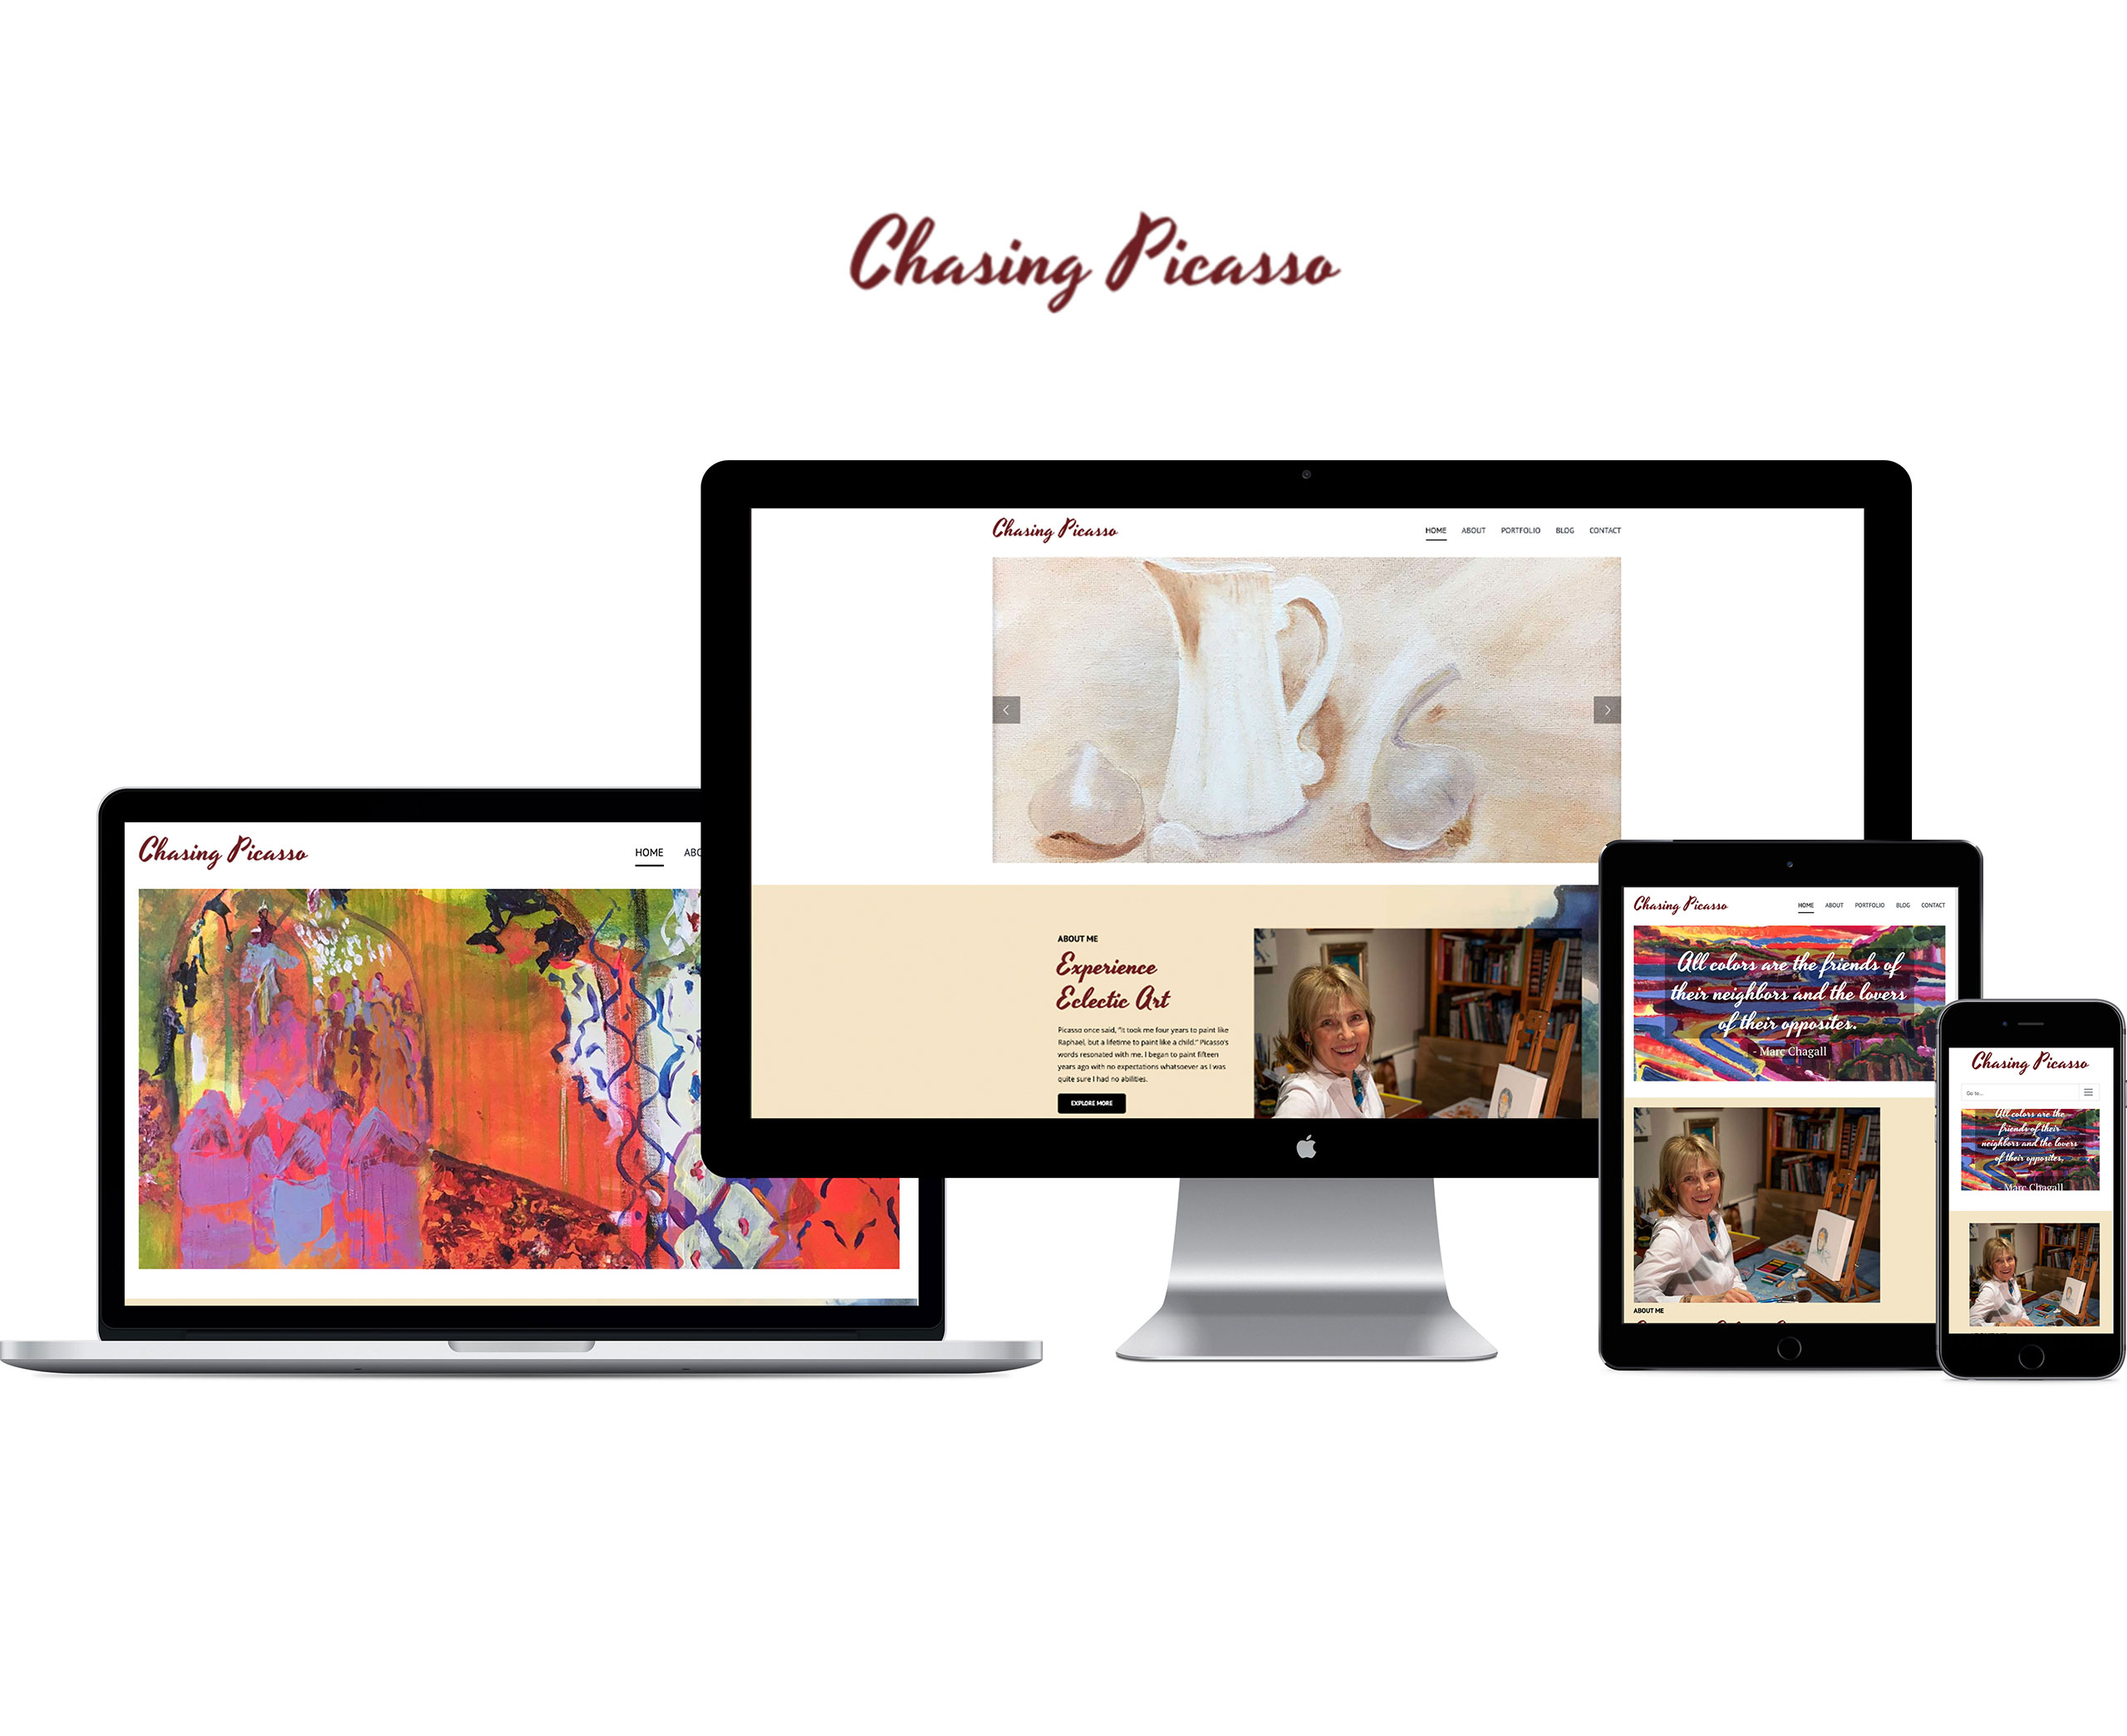 mobile and desktop versions of the Chasing Picasso Website